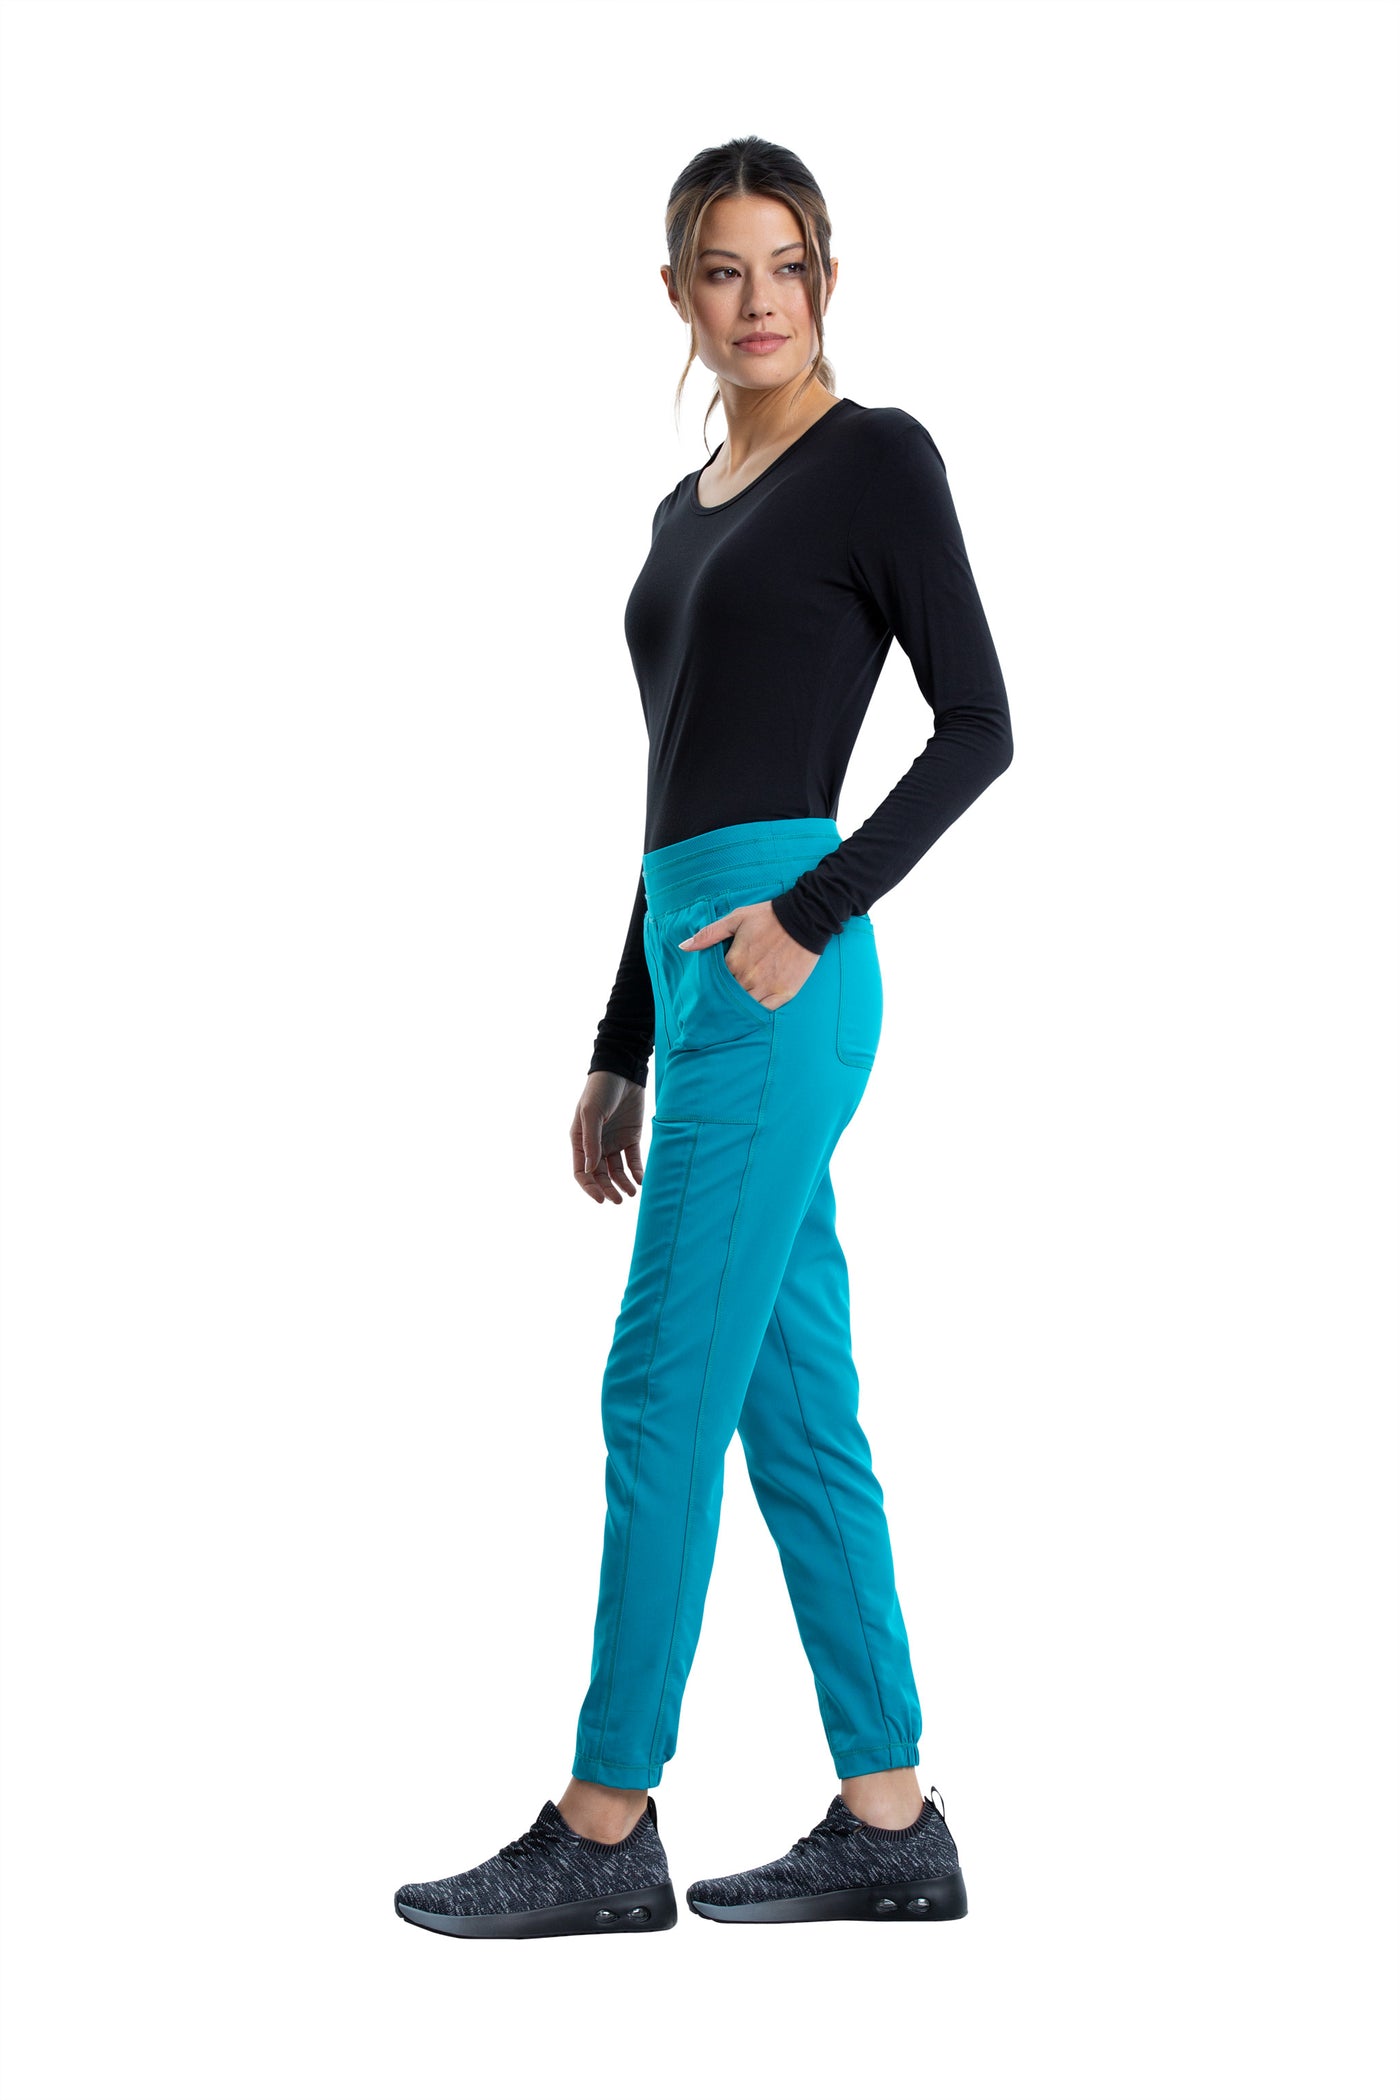 Teal Blue - Cherokee Workwear Revolution Natural Rise Jogger